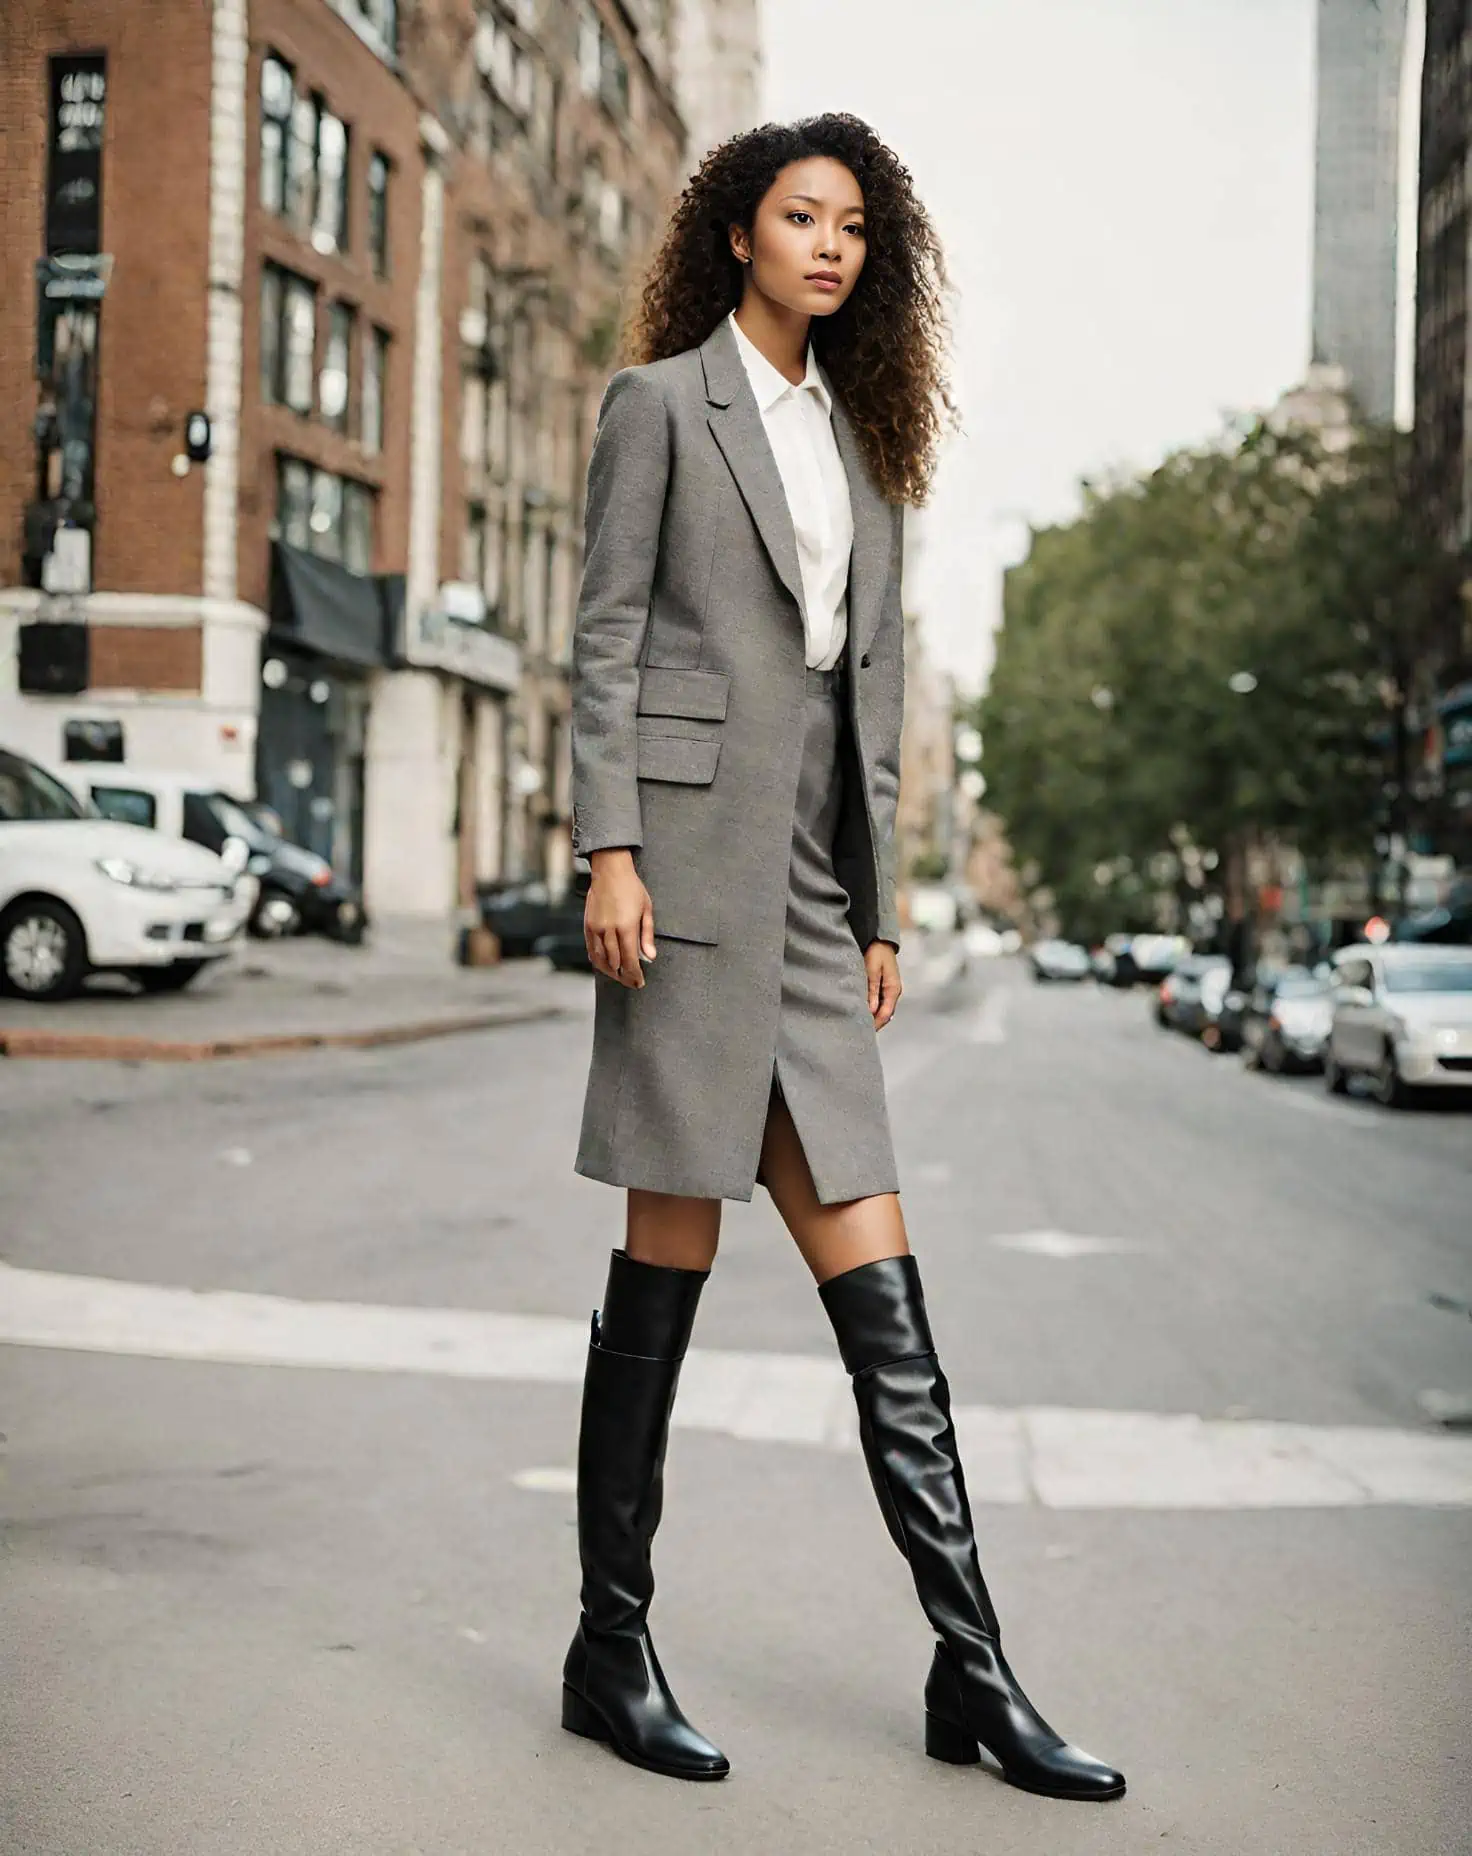 4 Chic Ways to Style Long Boots for Spring - Michelle's In Style